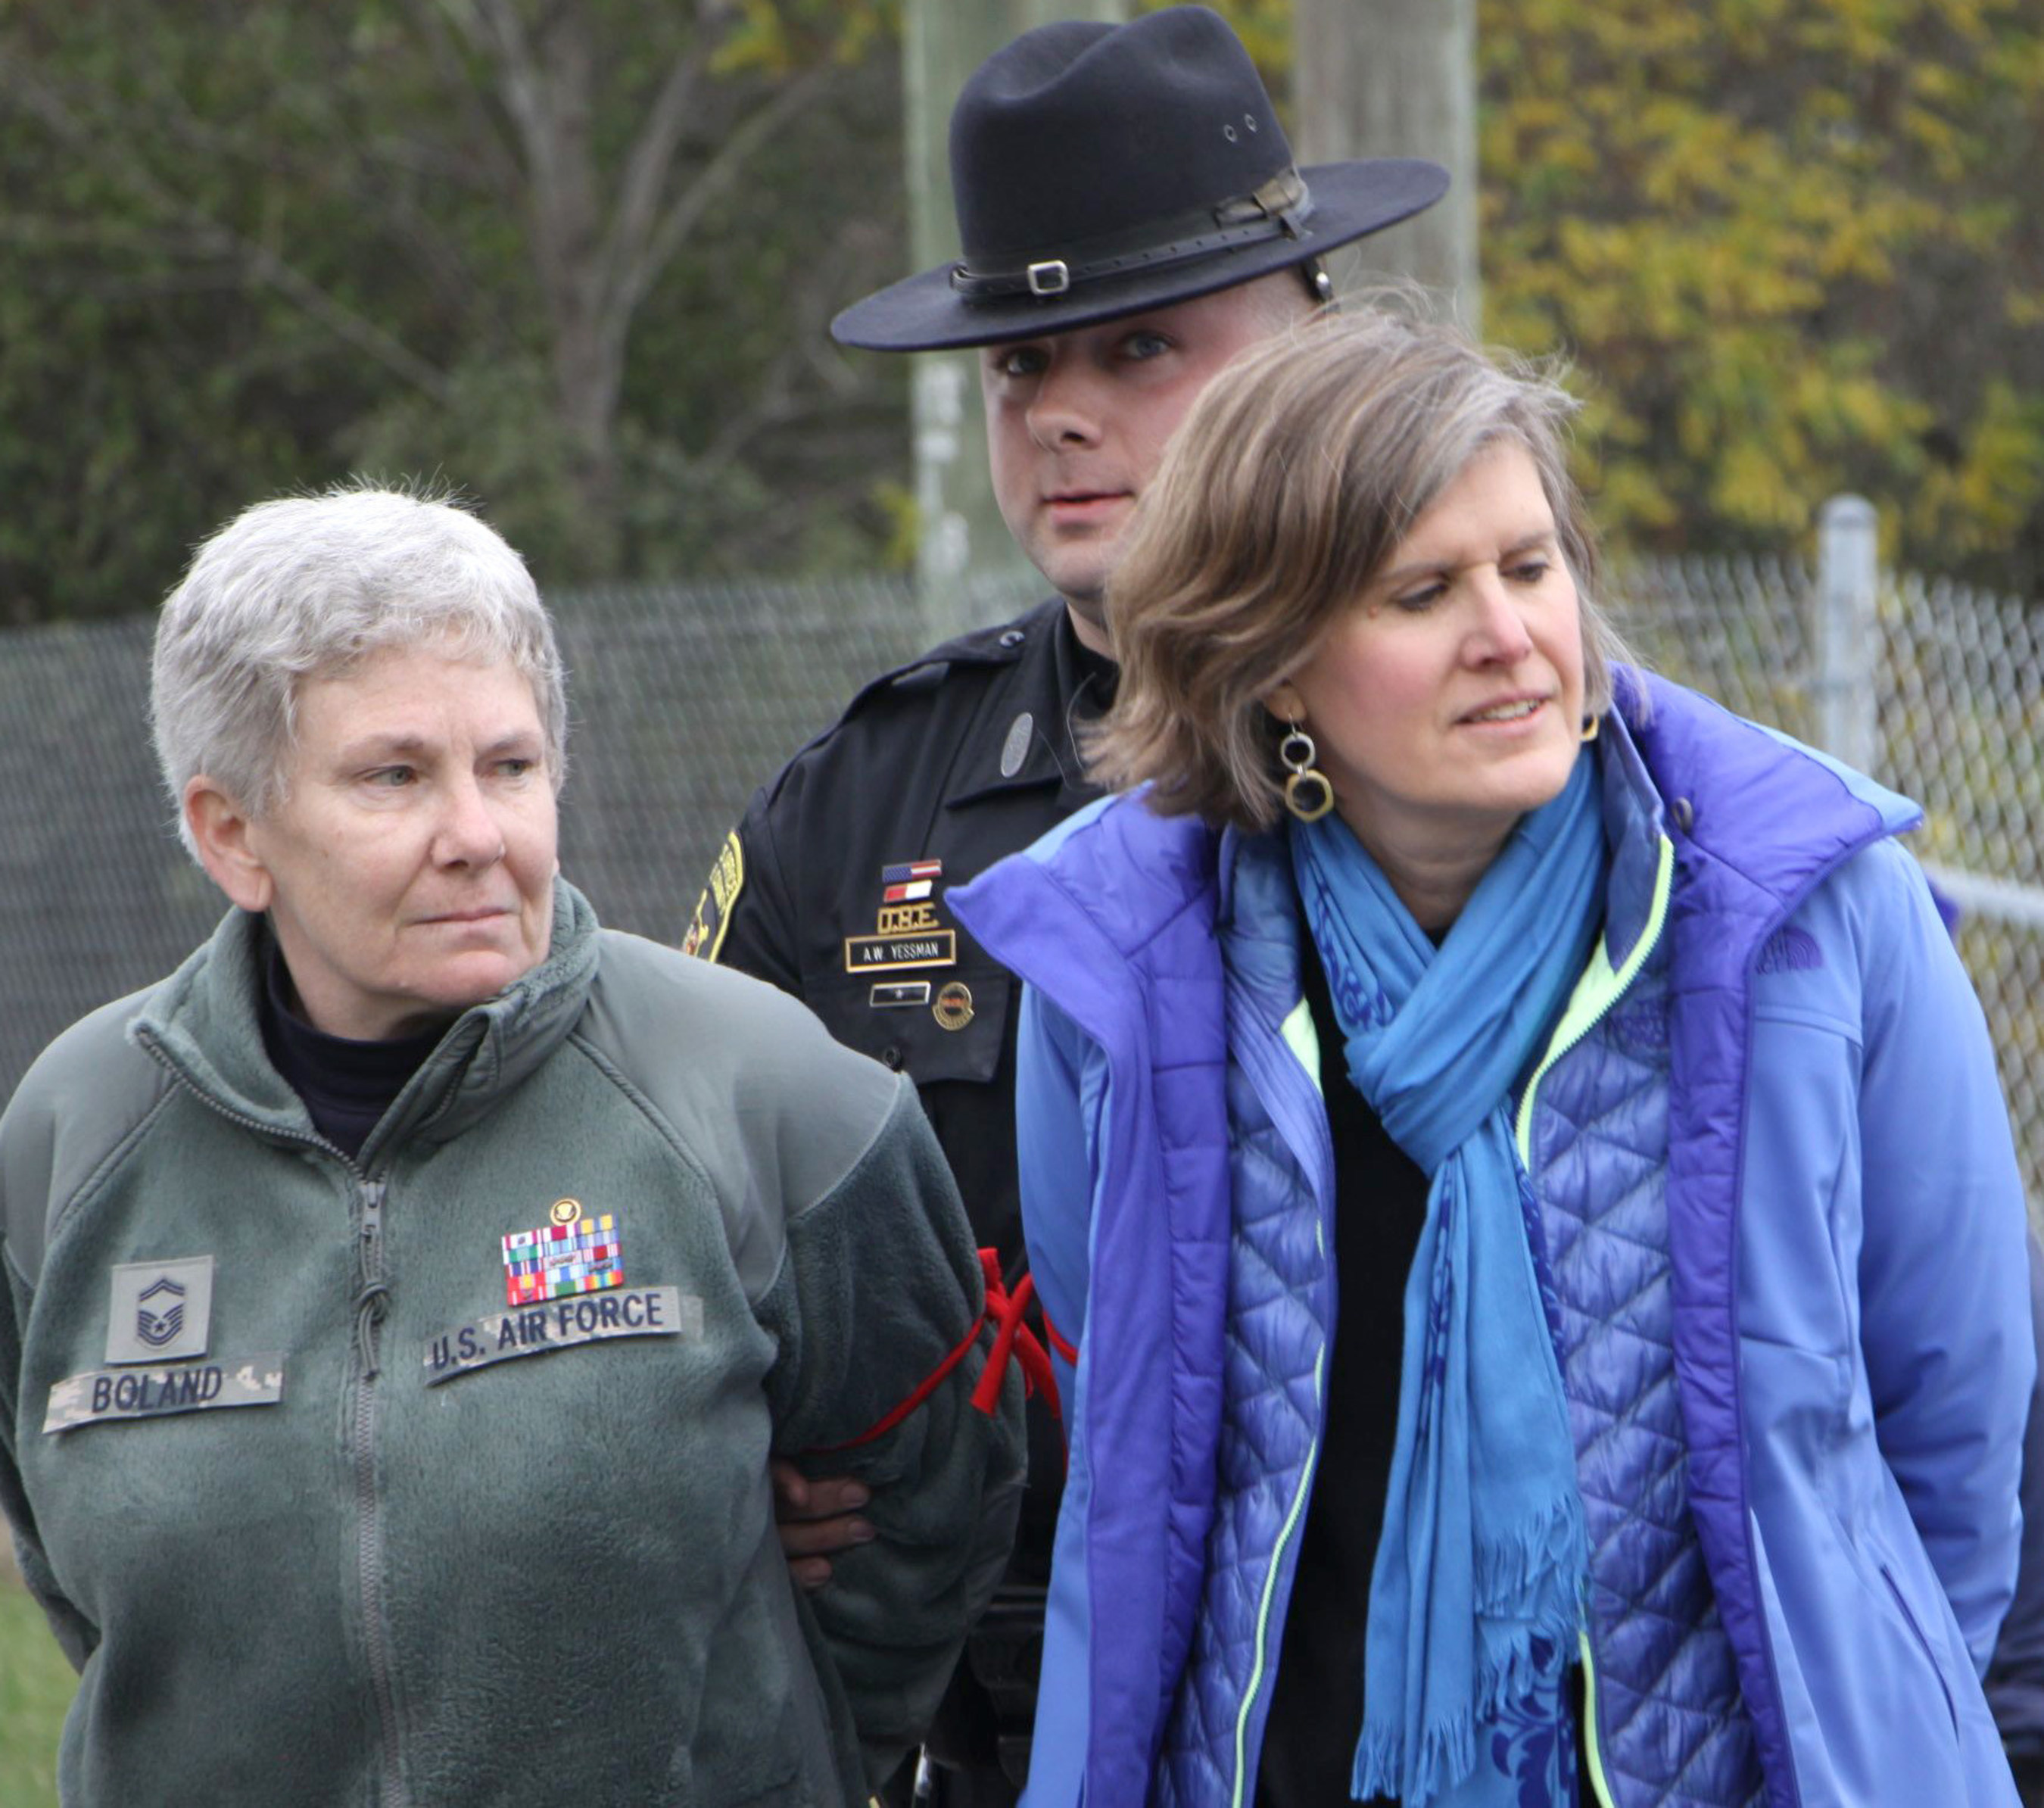 Seneca Lake Defenders Colleen Boland, Senior Master Sergeant, U.S. Air Force (Retired) and renown author and biologist Sandra Steingraber being arrested and led away by Schuyler County Sheriff Yessman. The two women were blockading the gates of Crestwood Midstream with eight others in opposition to expansion of dangerous gas storage in the crumbling salt caverns next to Seneca Lake. It is a center of winemaking and tourism in the pristine Finger Lakes Wine Country.